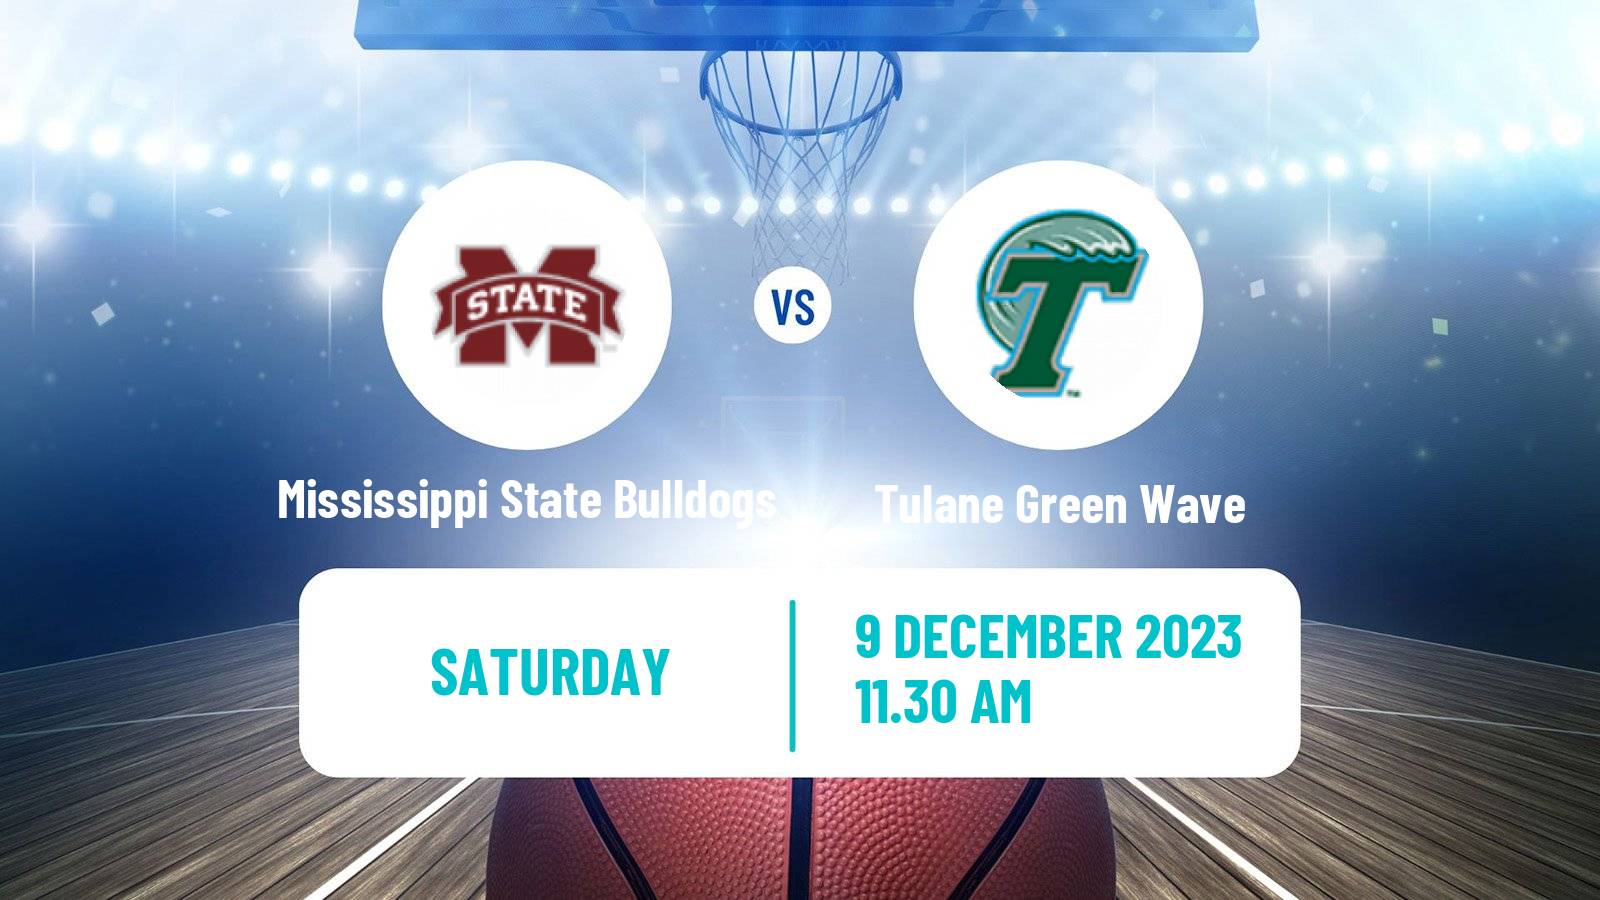 Basketball NCAA College Basketball Mississippi State Bulldogs - Tulane Green Wave